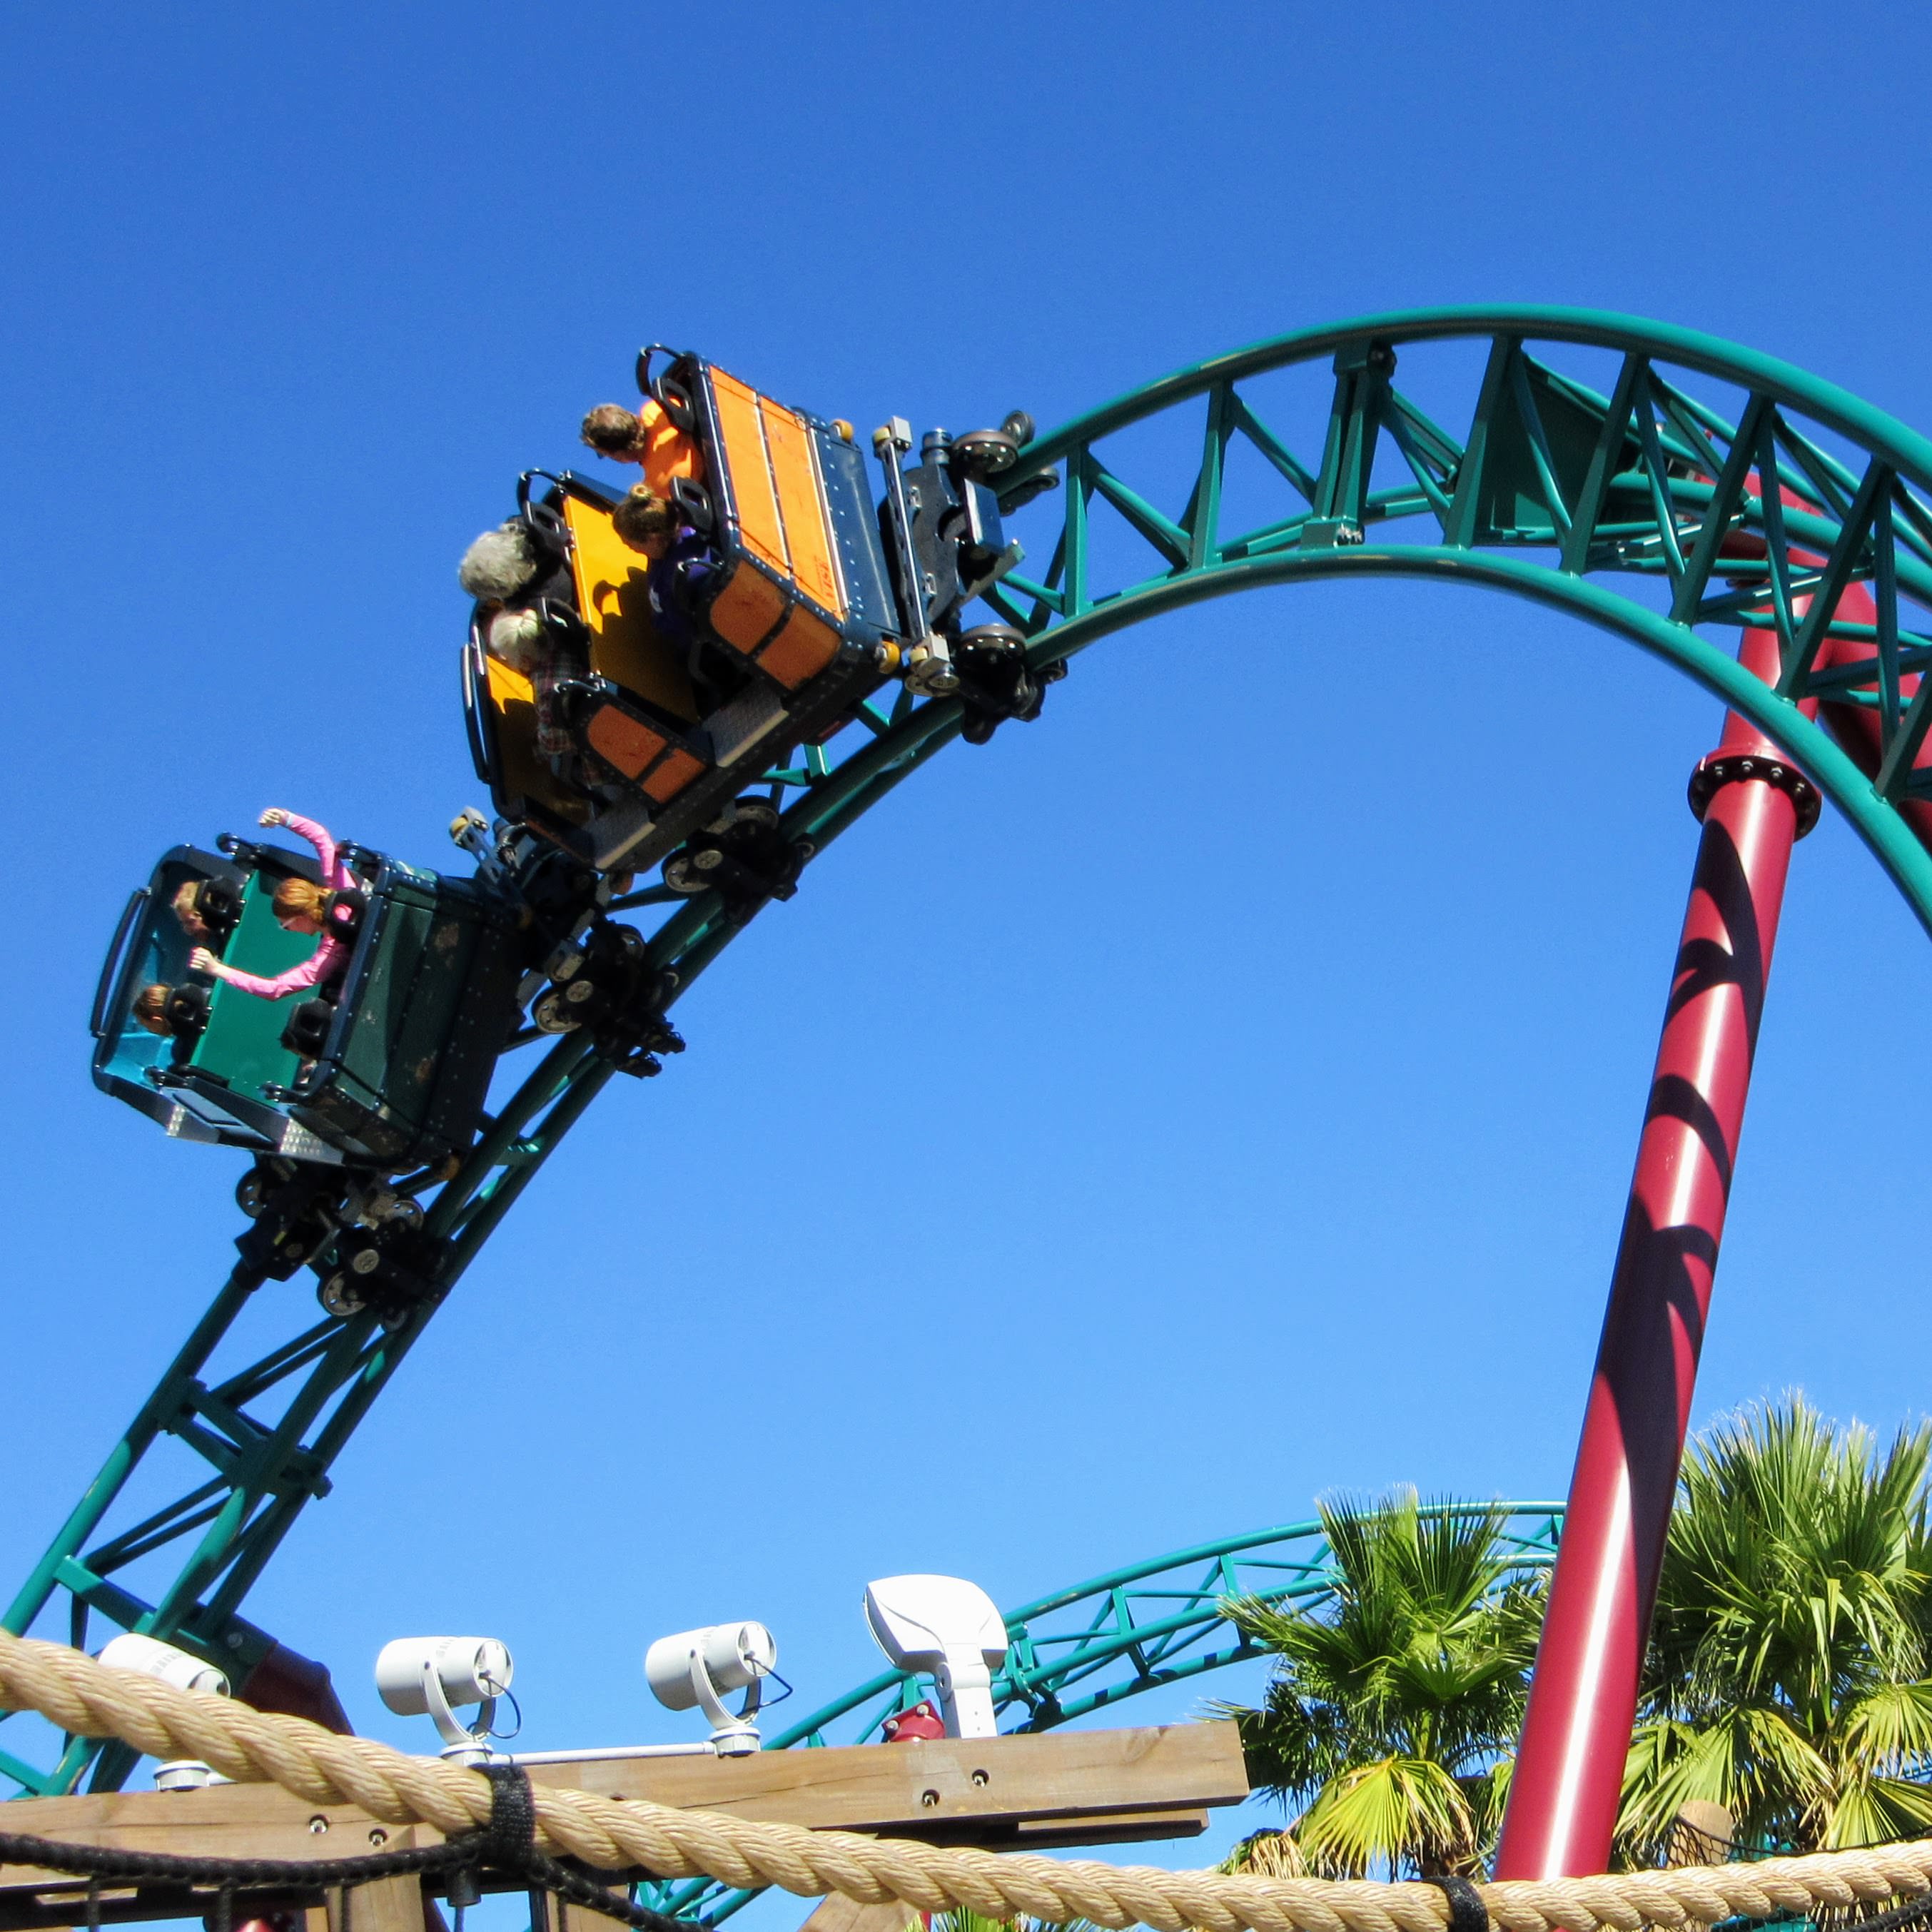 Visiting Busch Gardens Tampa Bay A Review Tips